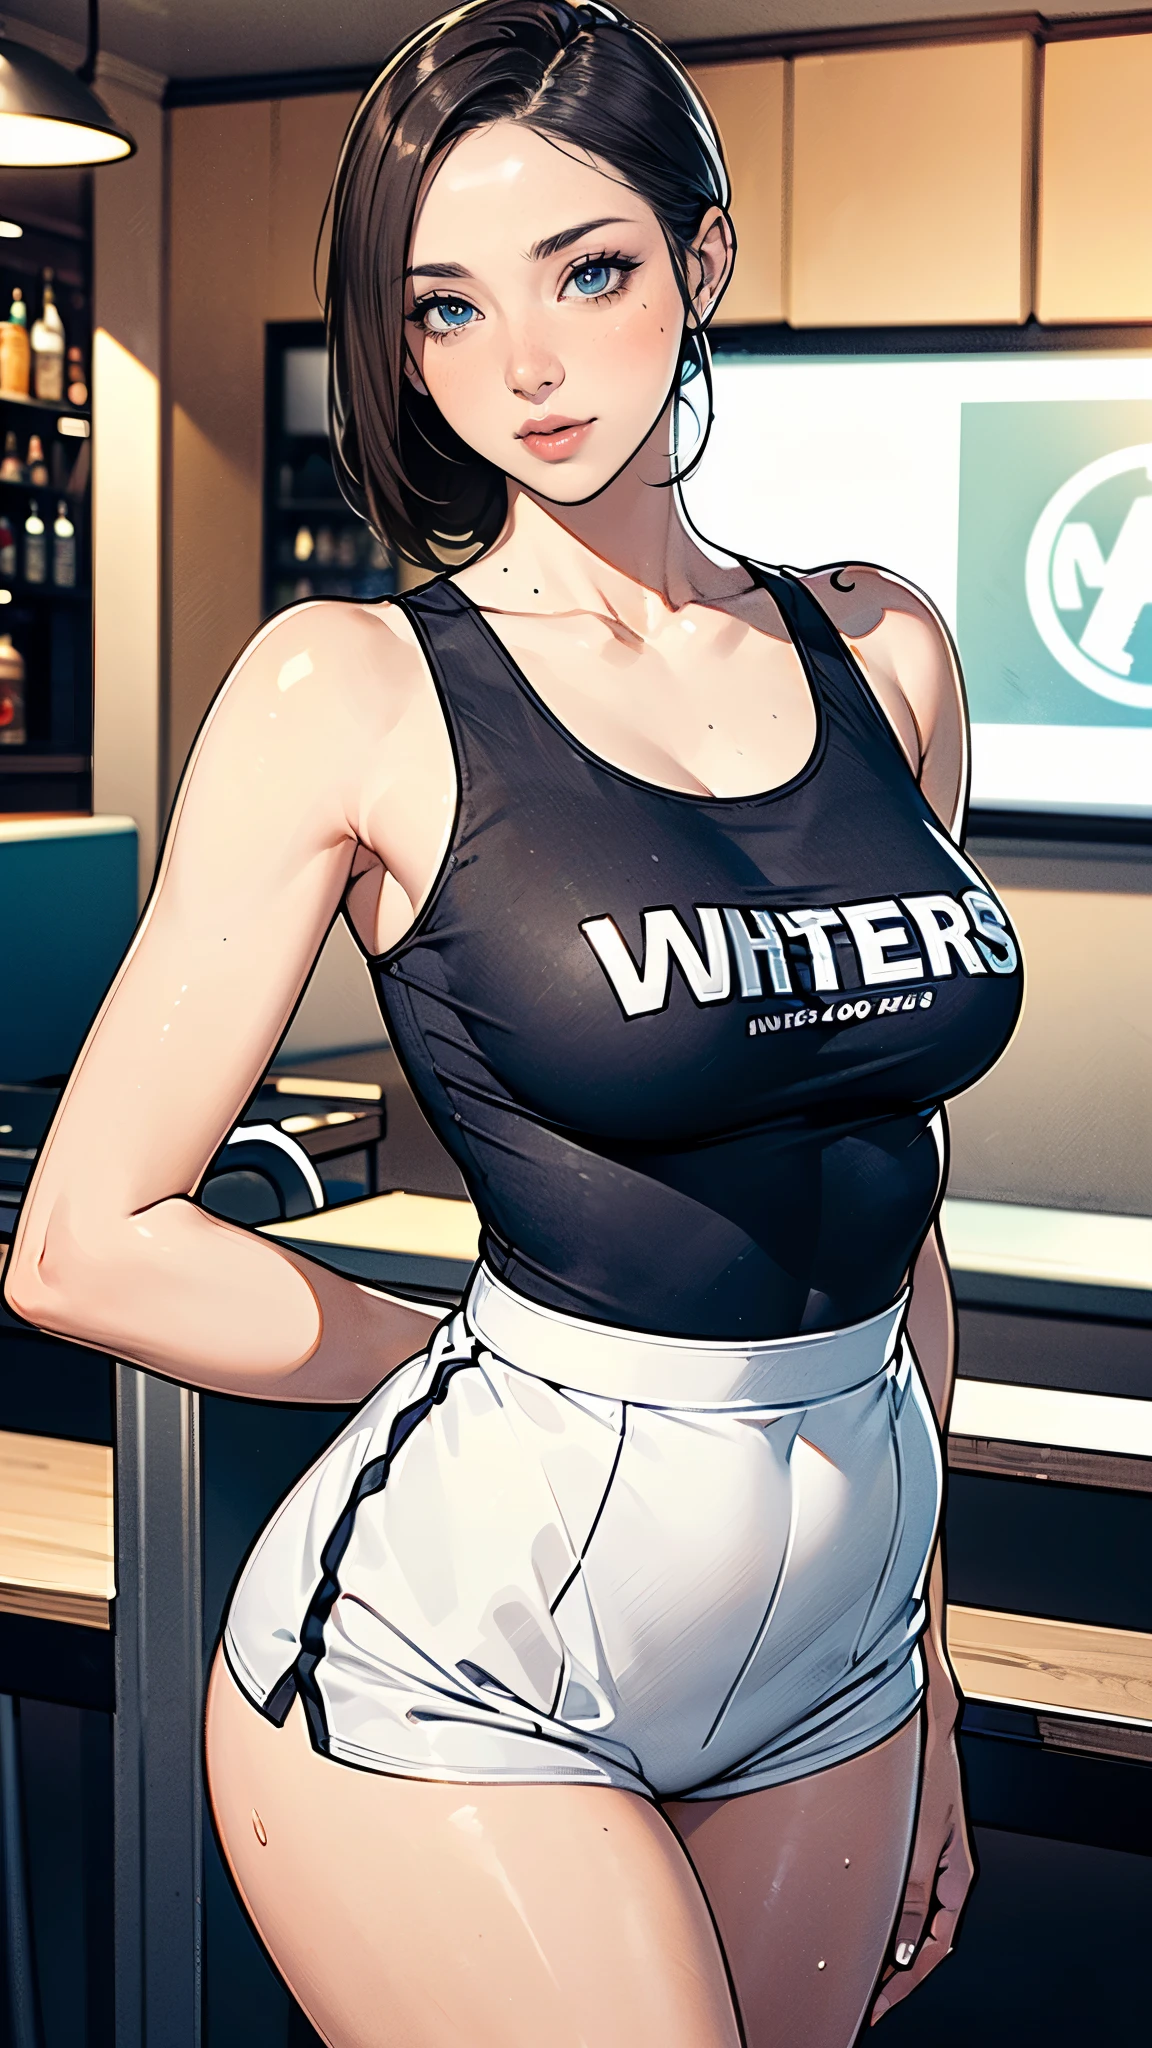 masterpiece,highest quality,Very detailed,High resolution,8k,wallpaper,Perfect lighting,BREAK(One Woman),(Mature woman working as a waiter at a sports bar:1.5),(48 years old),(hooters),(((A very form fitting white tank top:1.5))),((The tank top has the logo of a sports bar on it.:1.5)),(((Tiny shorts:1,5))),(((Very detailed costume drawings:1.5))),BREAK(Beautiful Eyes:1.5),(Detailed face drawing:1.5),(Detailed face drawing:1.5),((Very detailed female hand:1.5)),(Shiny skin:1.2),(Big Breasts:1.2),(Thick thighs:1.5),(Sensual body:1.5),(Sports bar background:1.5),(((Blur the background:1.5))),BREAK(((I&#39;m embarrassed:1.5)))